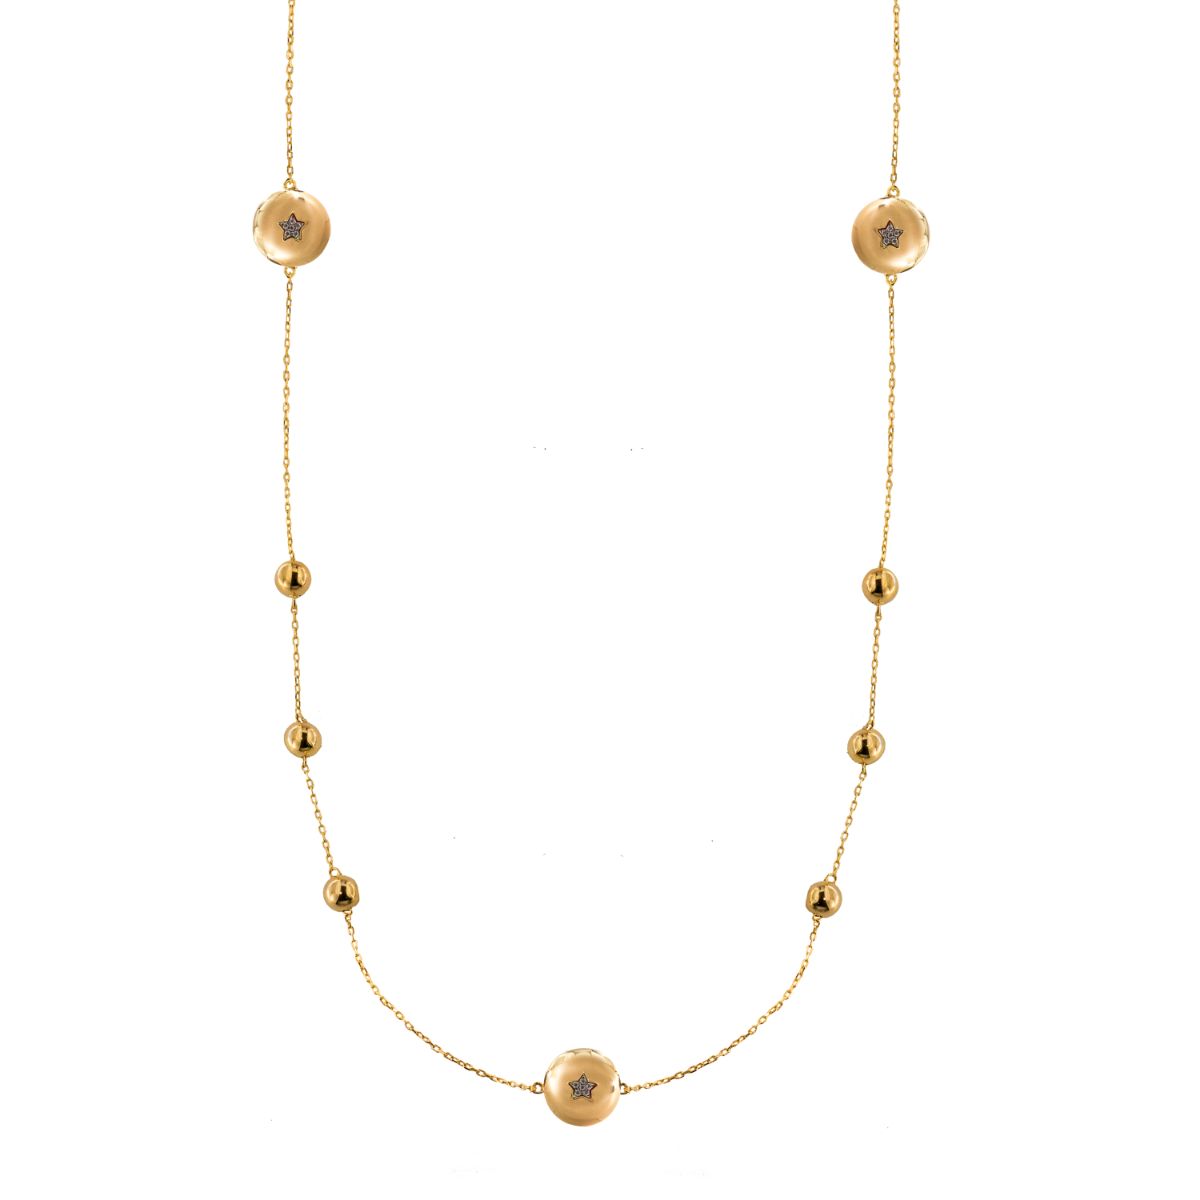 Necklaces - Alternate sphere necklace - STARBALL - 1 | Rue des Mille